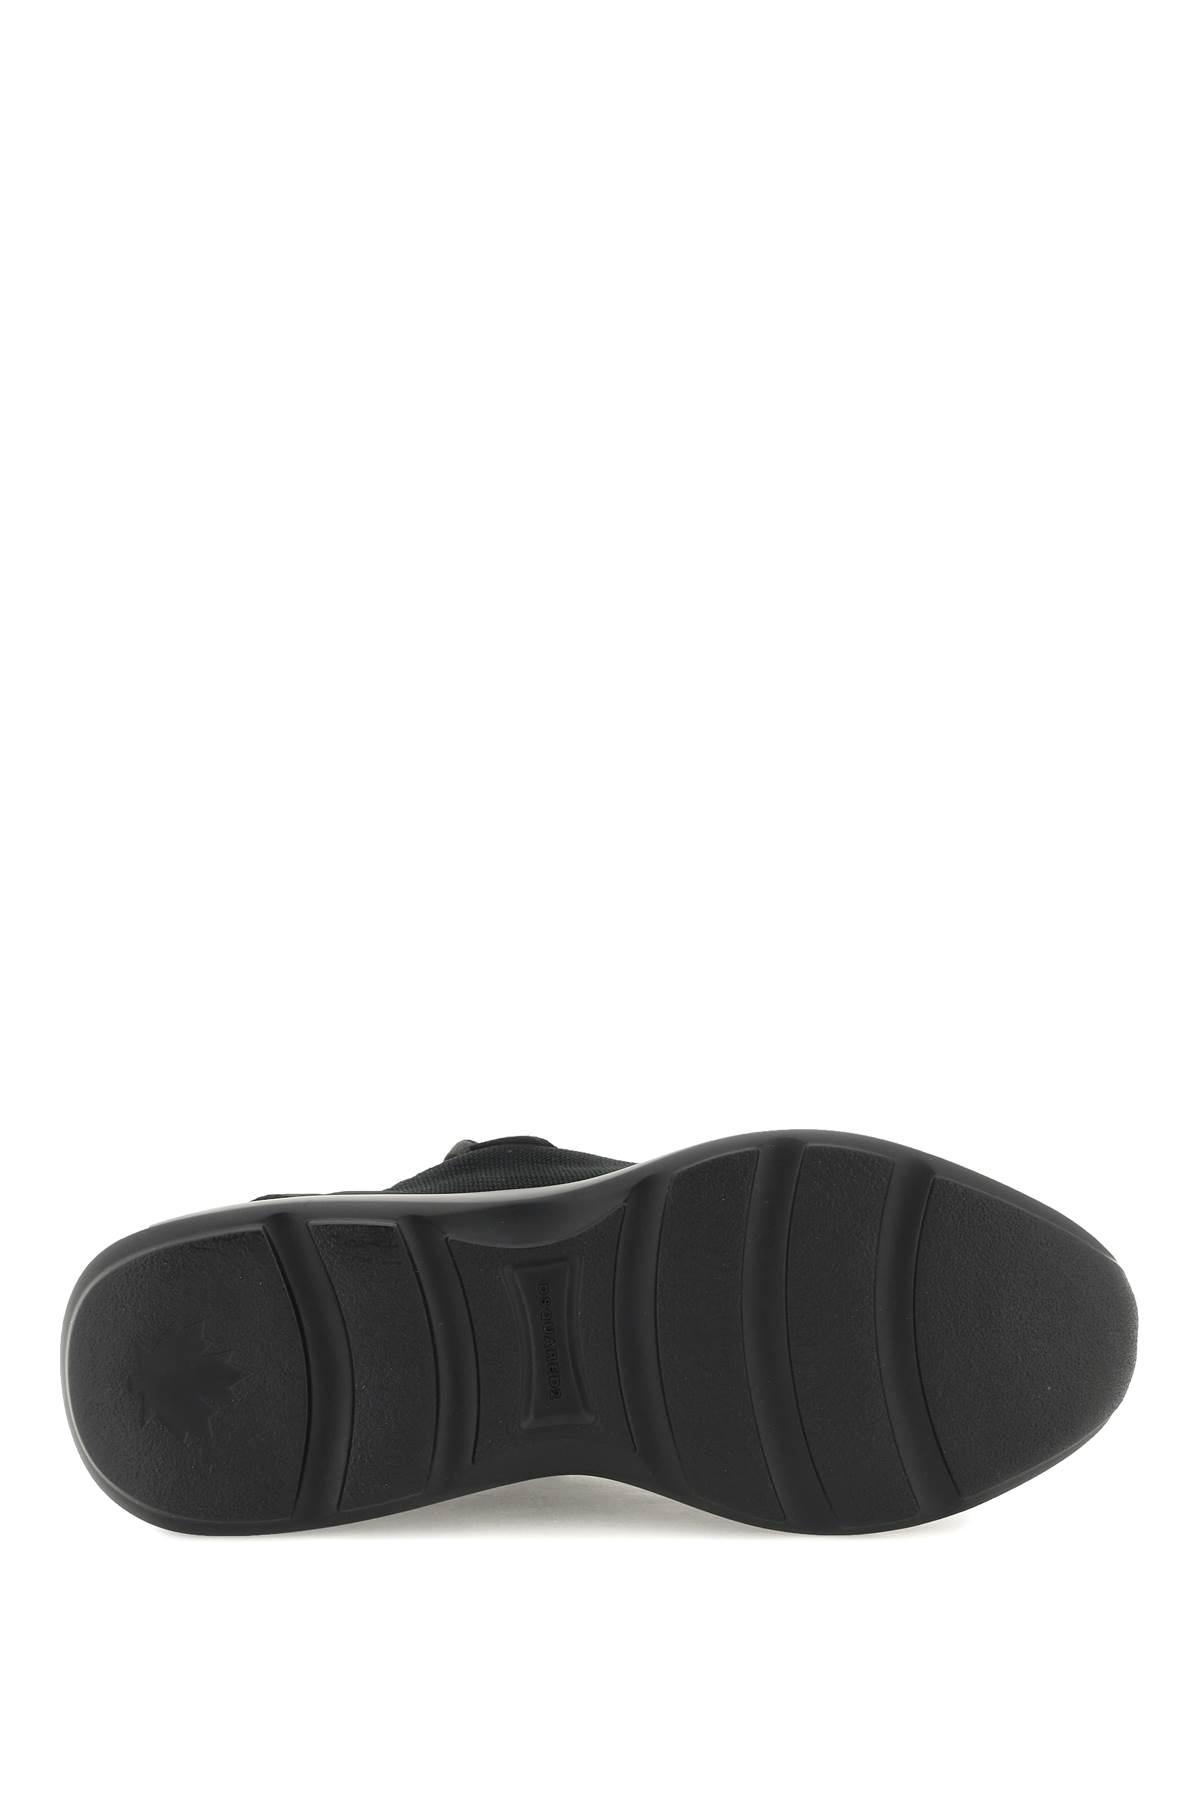 DSquared² Fly Low Top Sneakers in Black for Men | Lyst